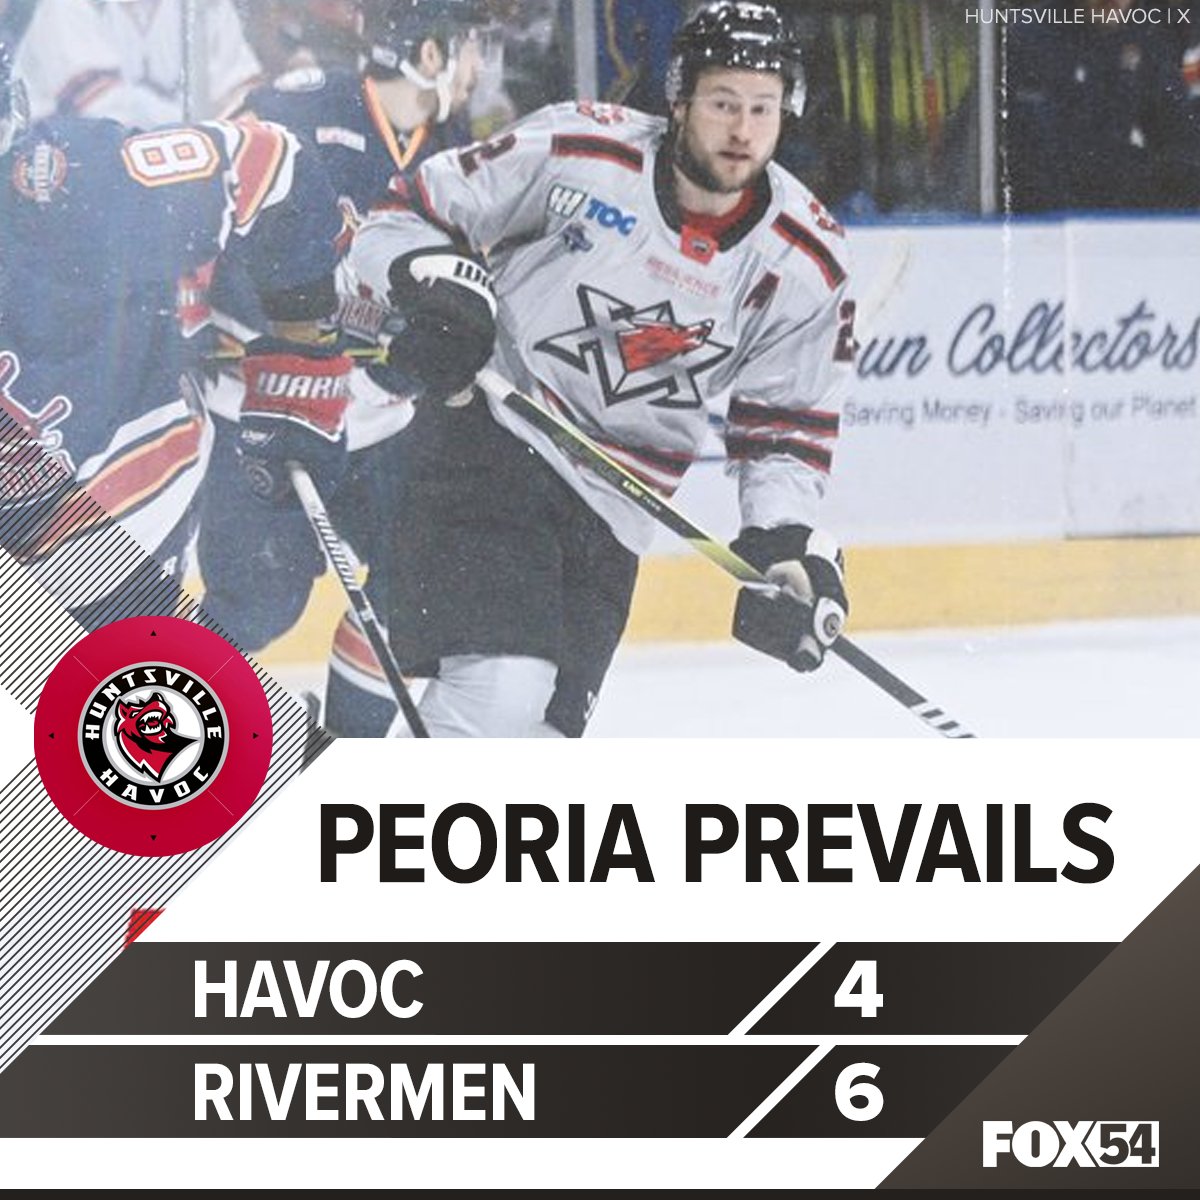 #HSVvsPEO just ended with Peoria coming up over the #Havoc 6-4. The SPHL title will be decided in tomorrow's game!